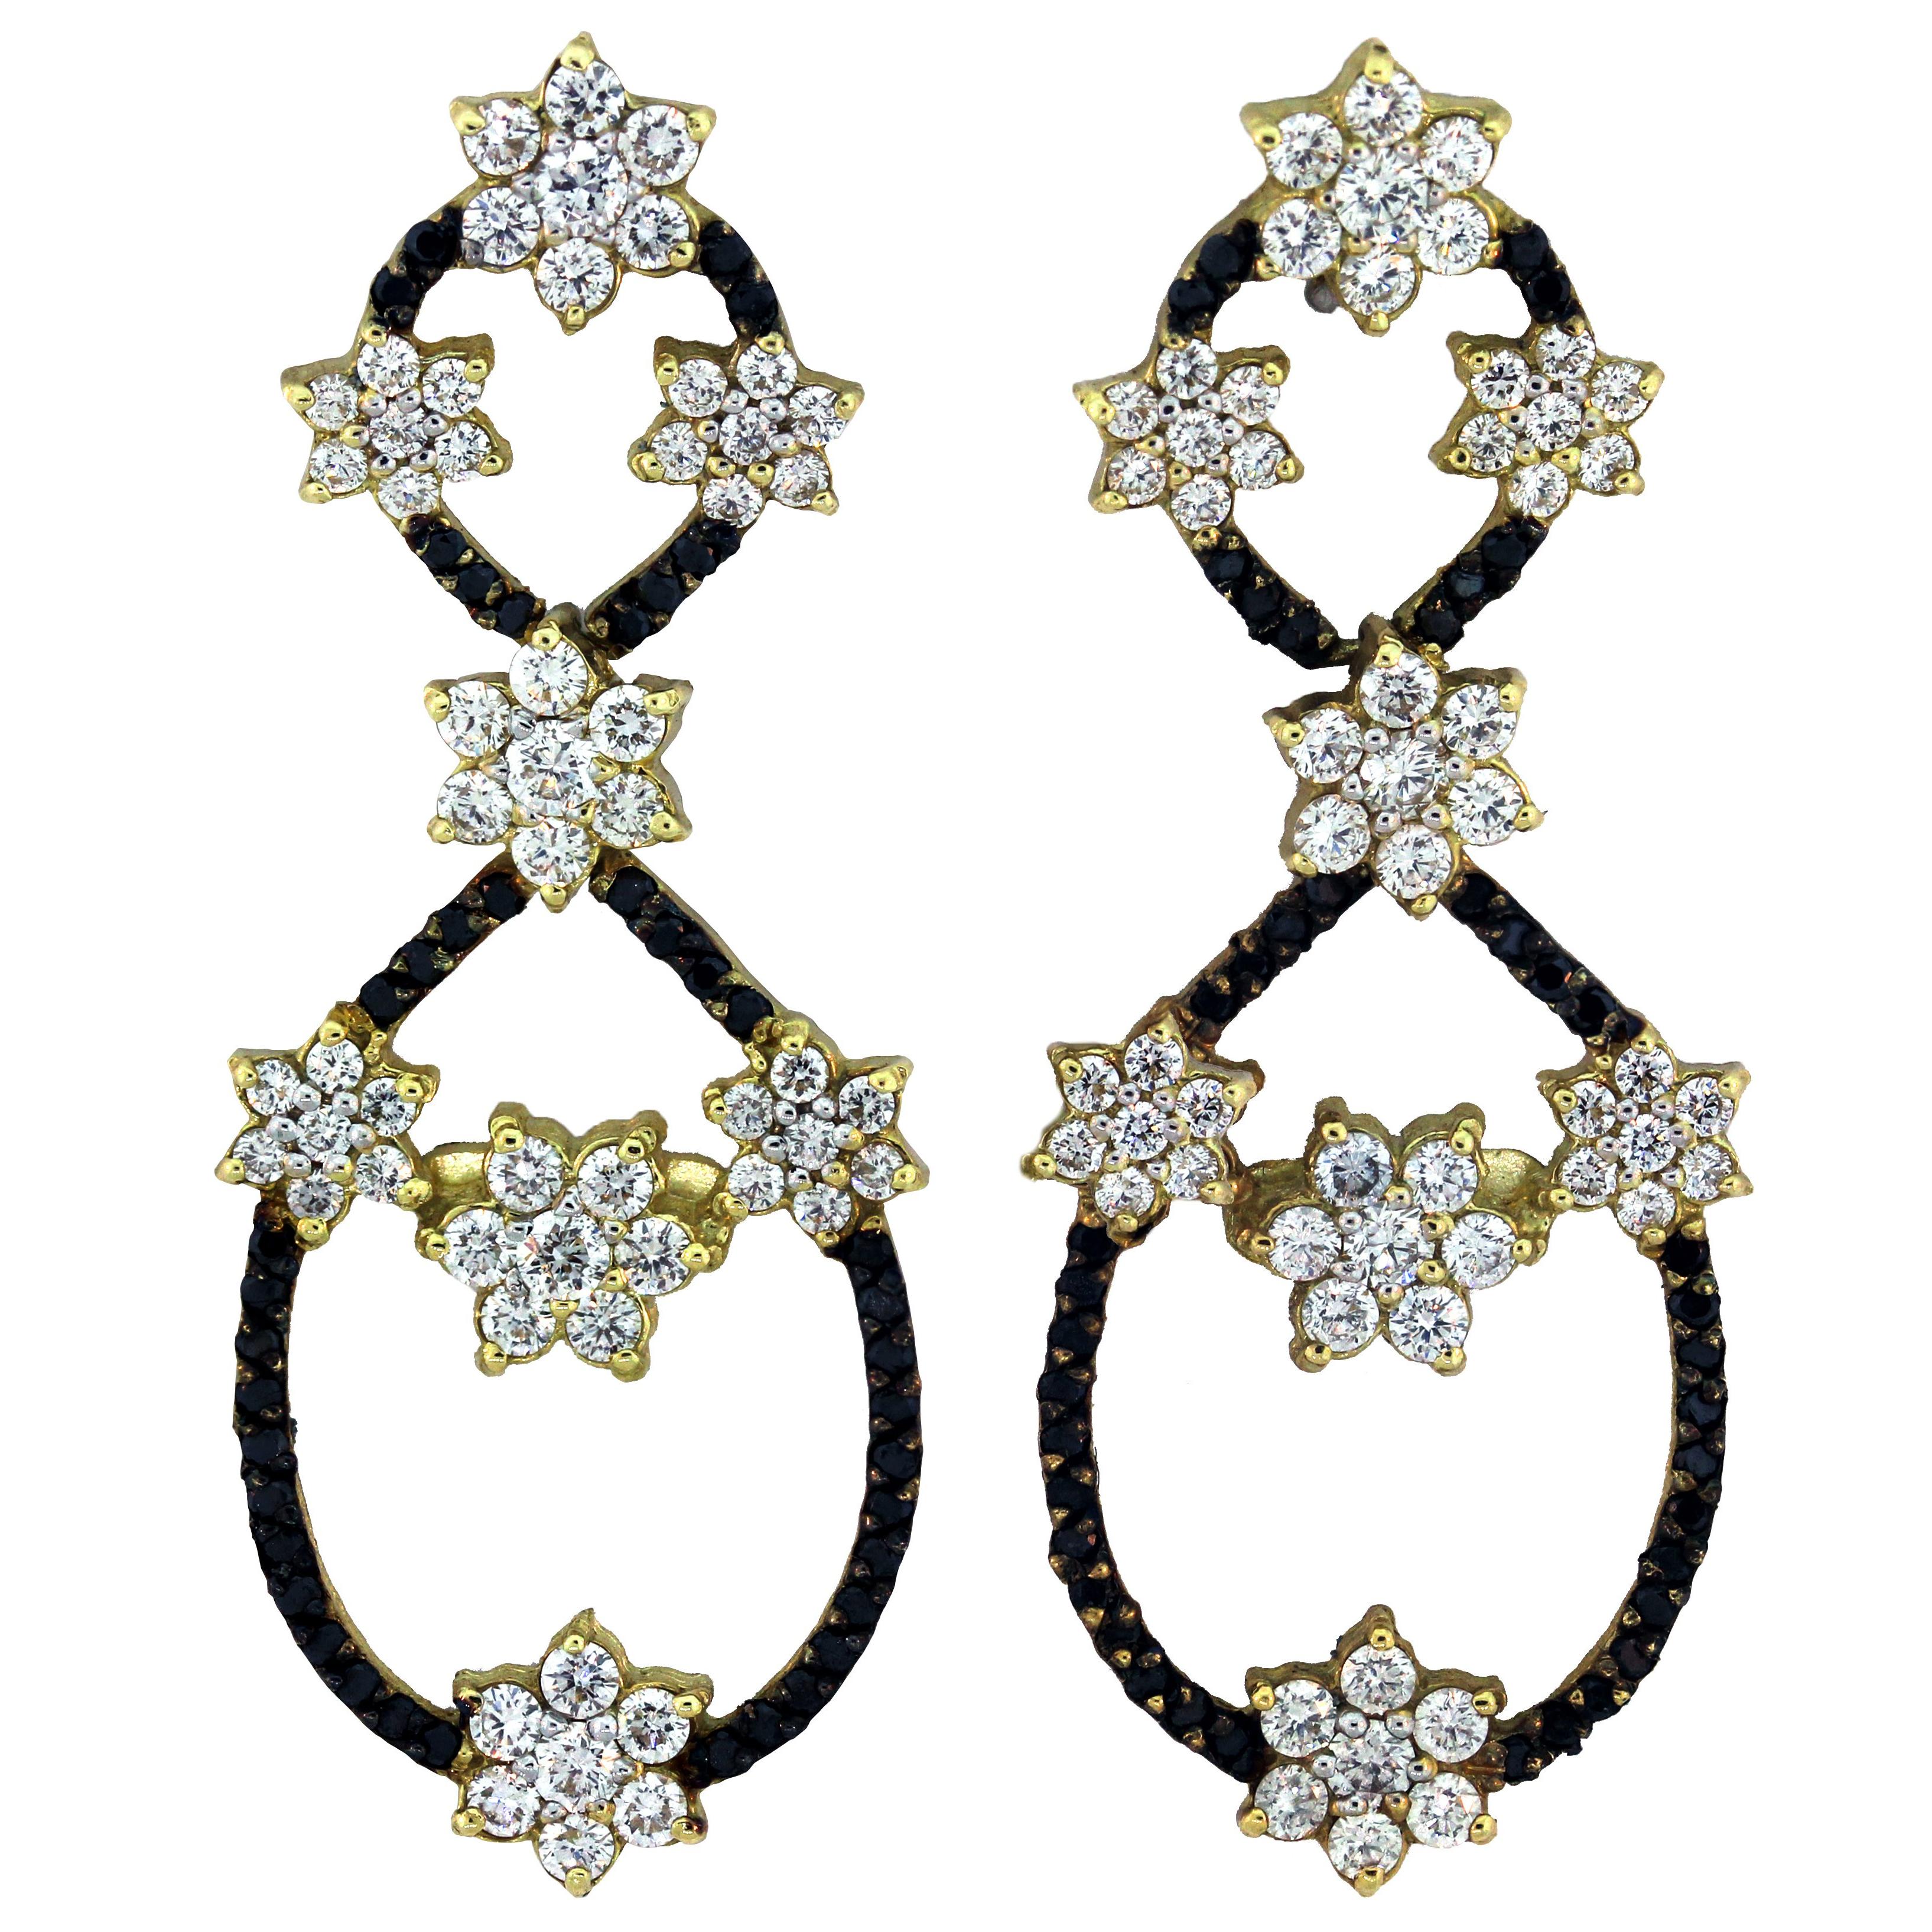 Black Diamond Chandelier Earrings with White Gold and Diamonds Stambolian